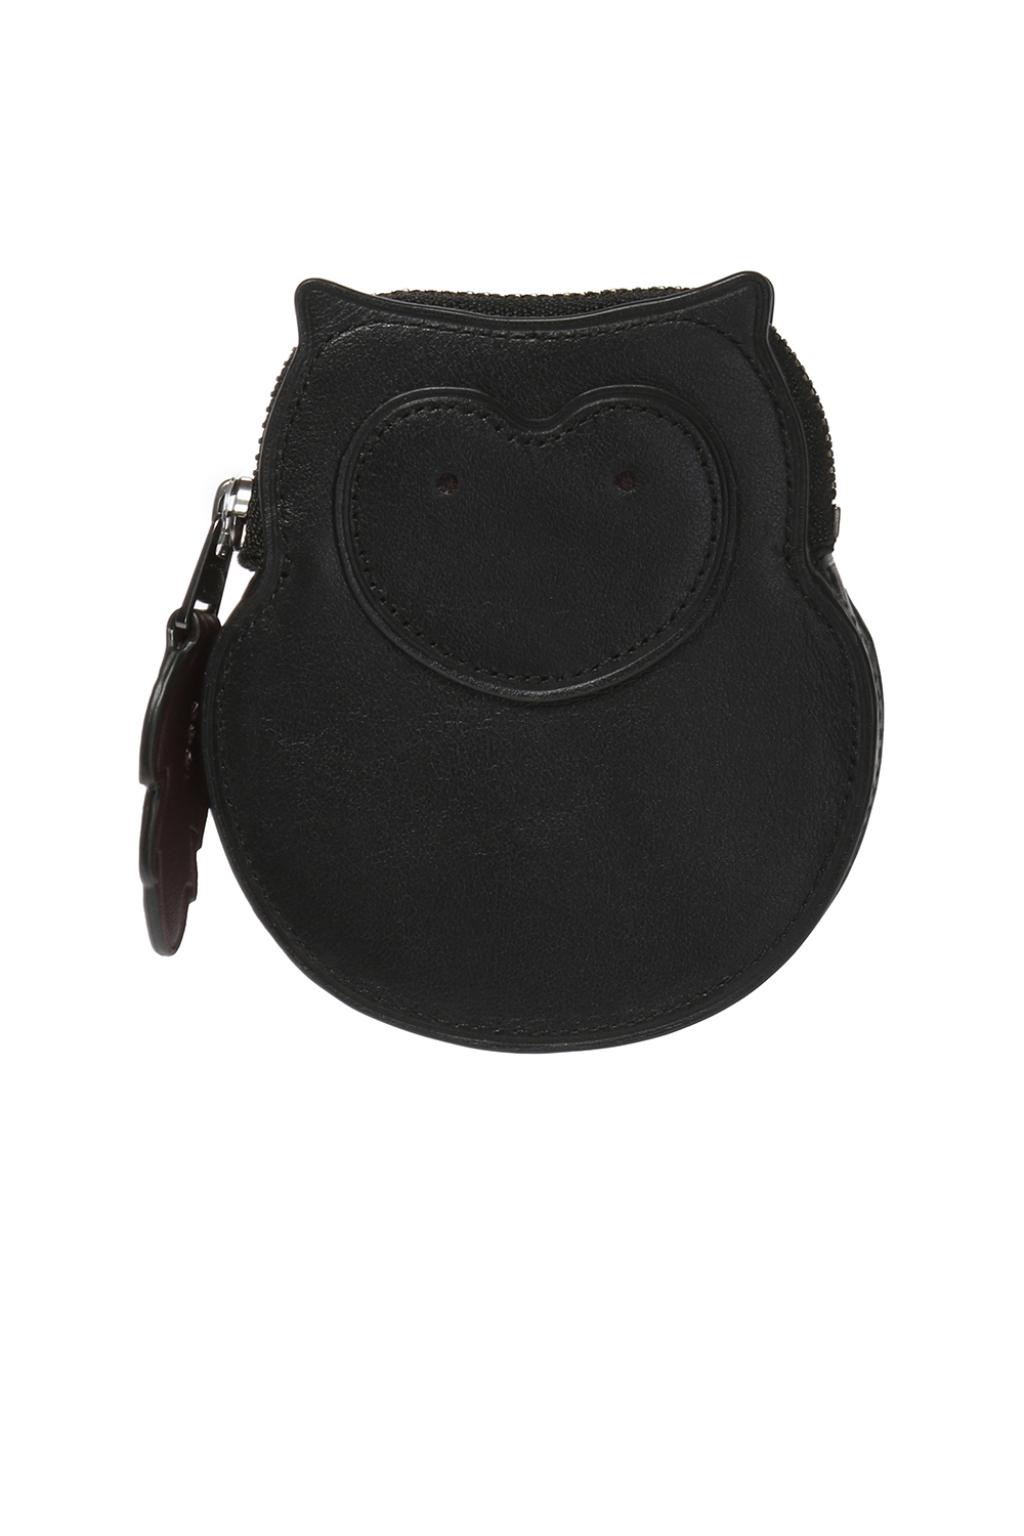 Owl Shaped Leather Coin Bag